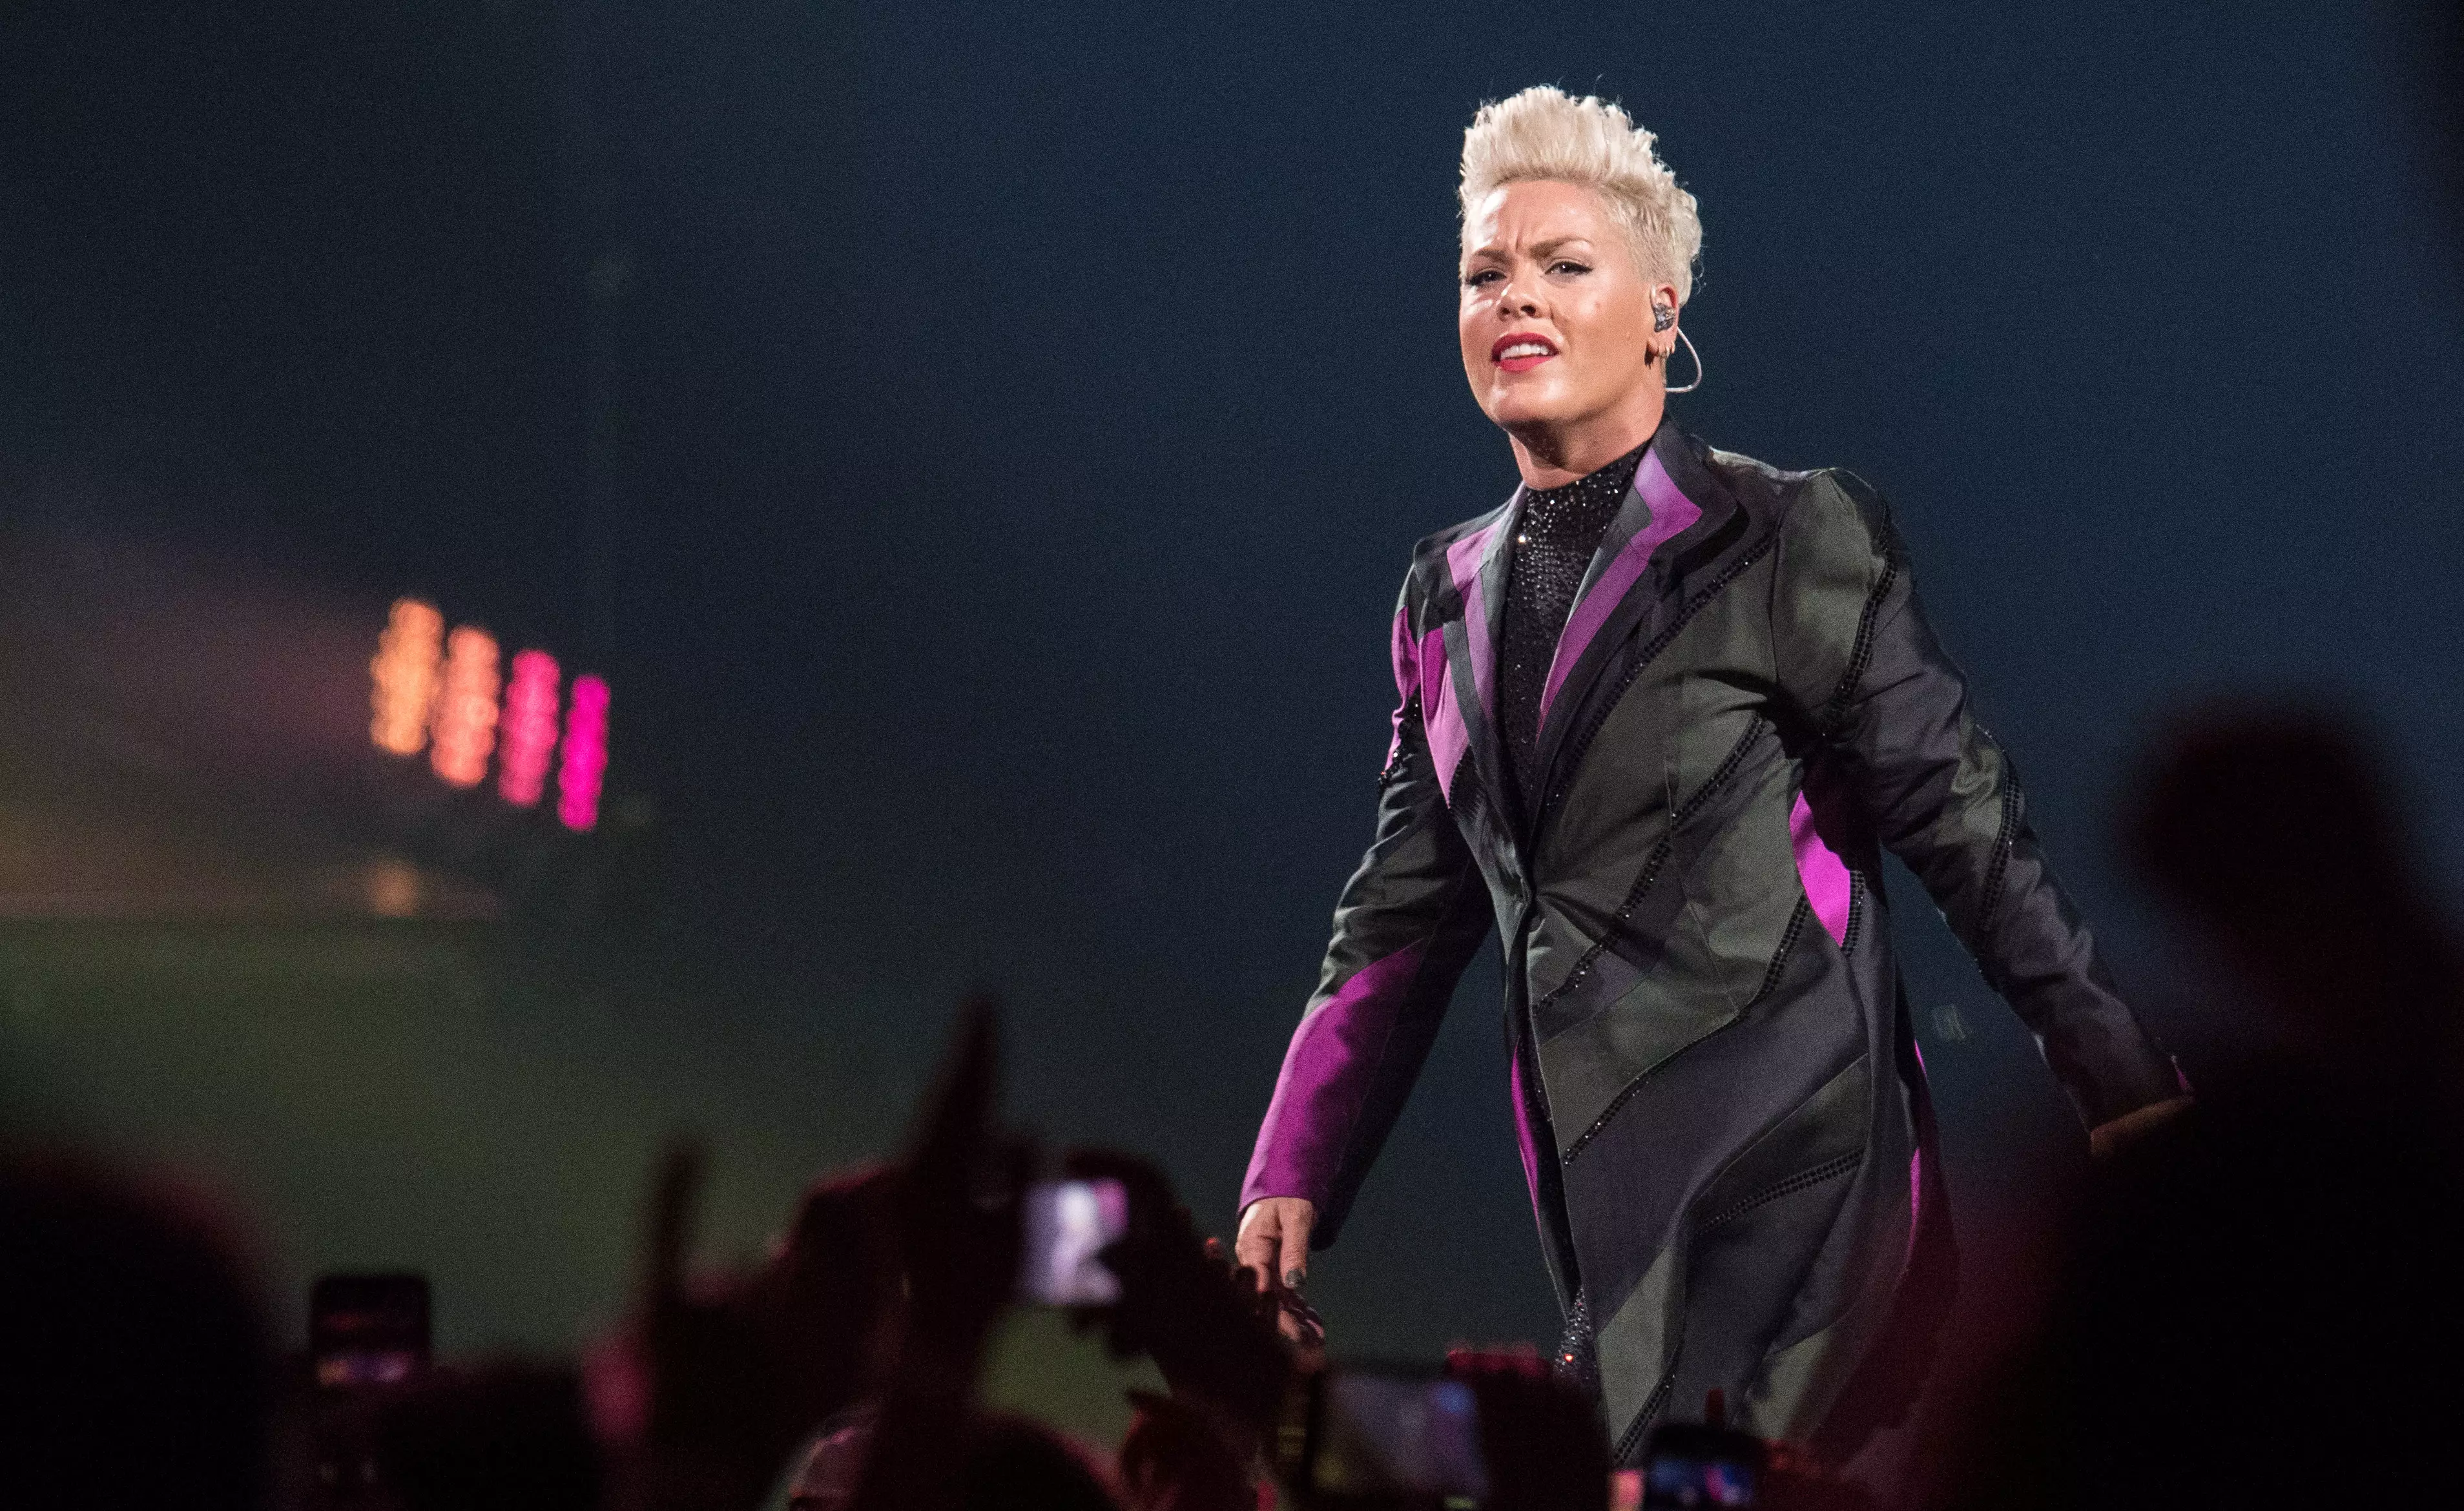 P!nk has donated $500,000 towards local fire services combating the Australian bushfires.